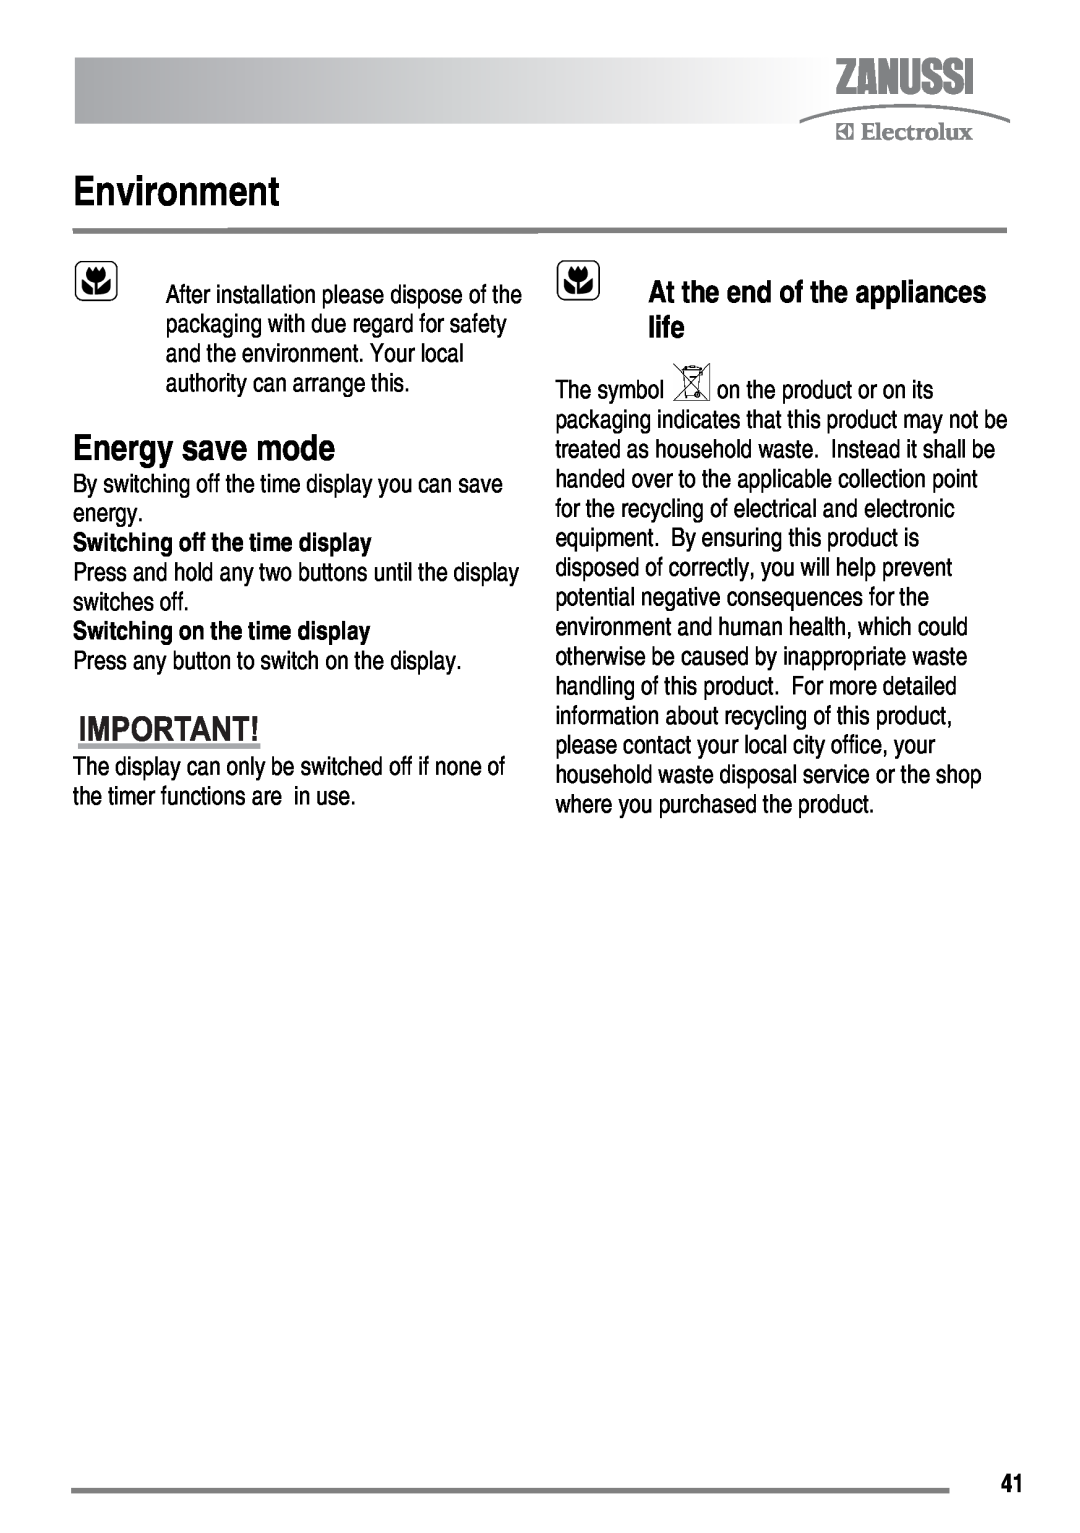 Zanussi ZKM6040 Environment, Energy save mode, At the end of the appliances life, Switching off the time display 